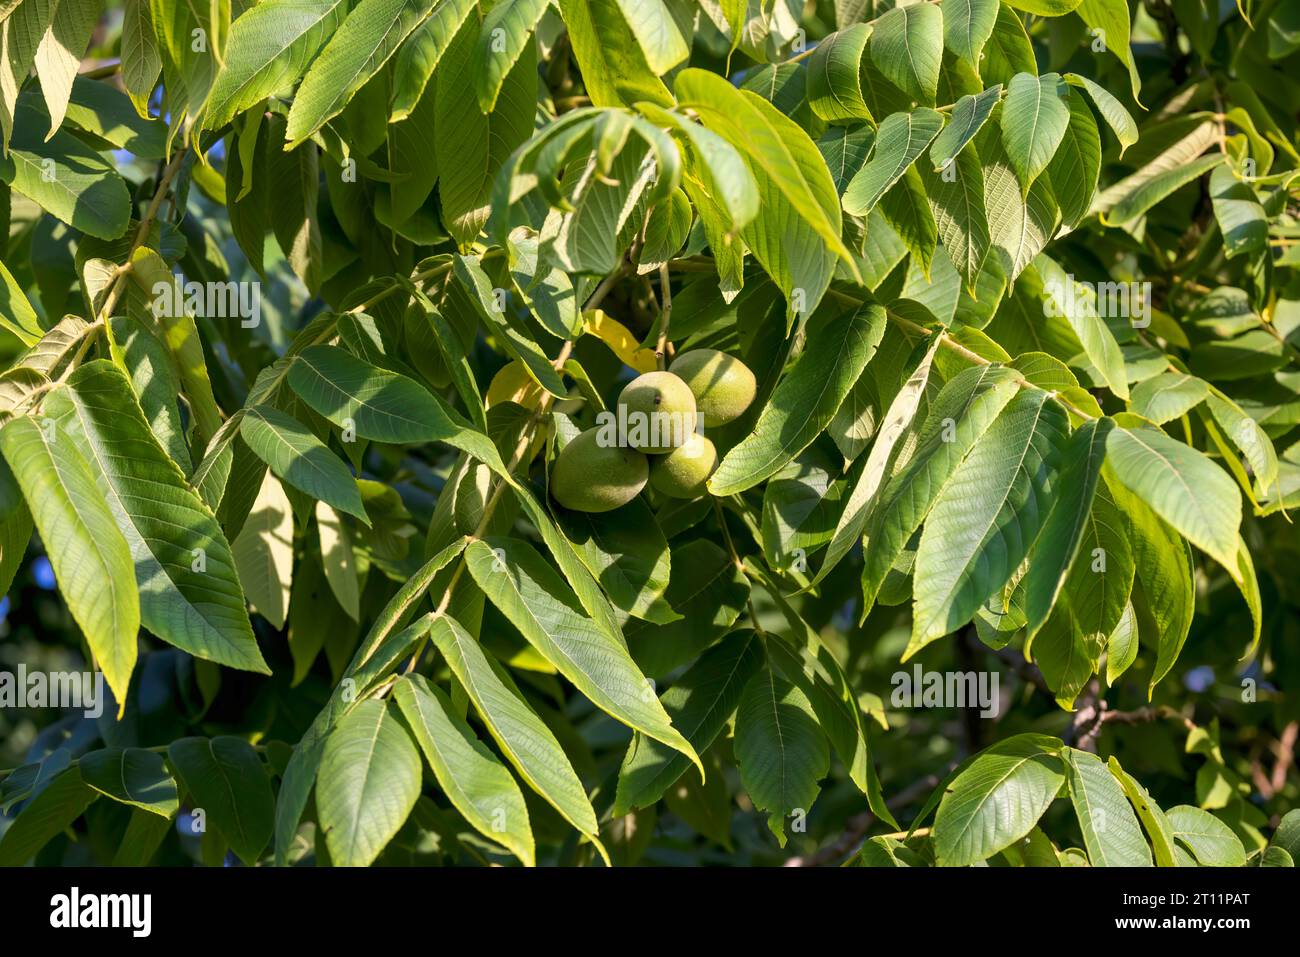 The  White walnut (Juglans cinerea), commonly known as butternut , is a species of walnut native to the eastern United States and southeast Canada. Stock Photo